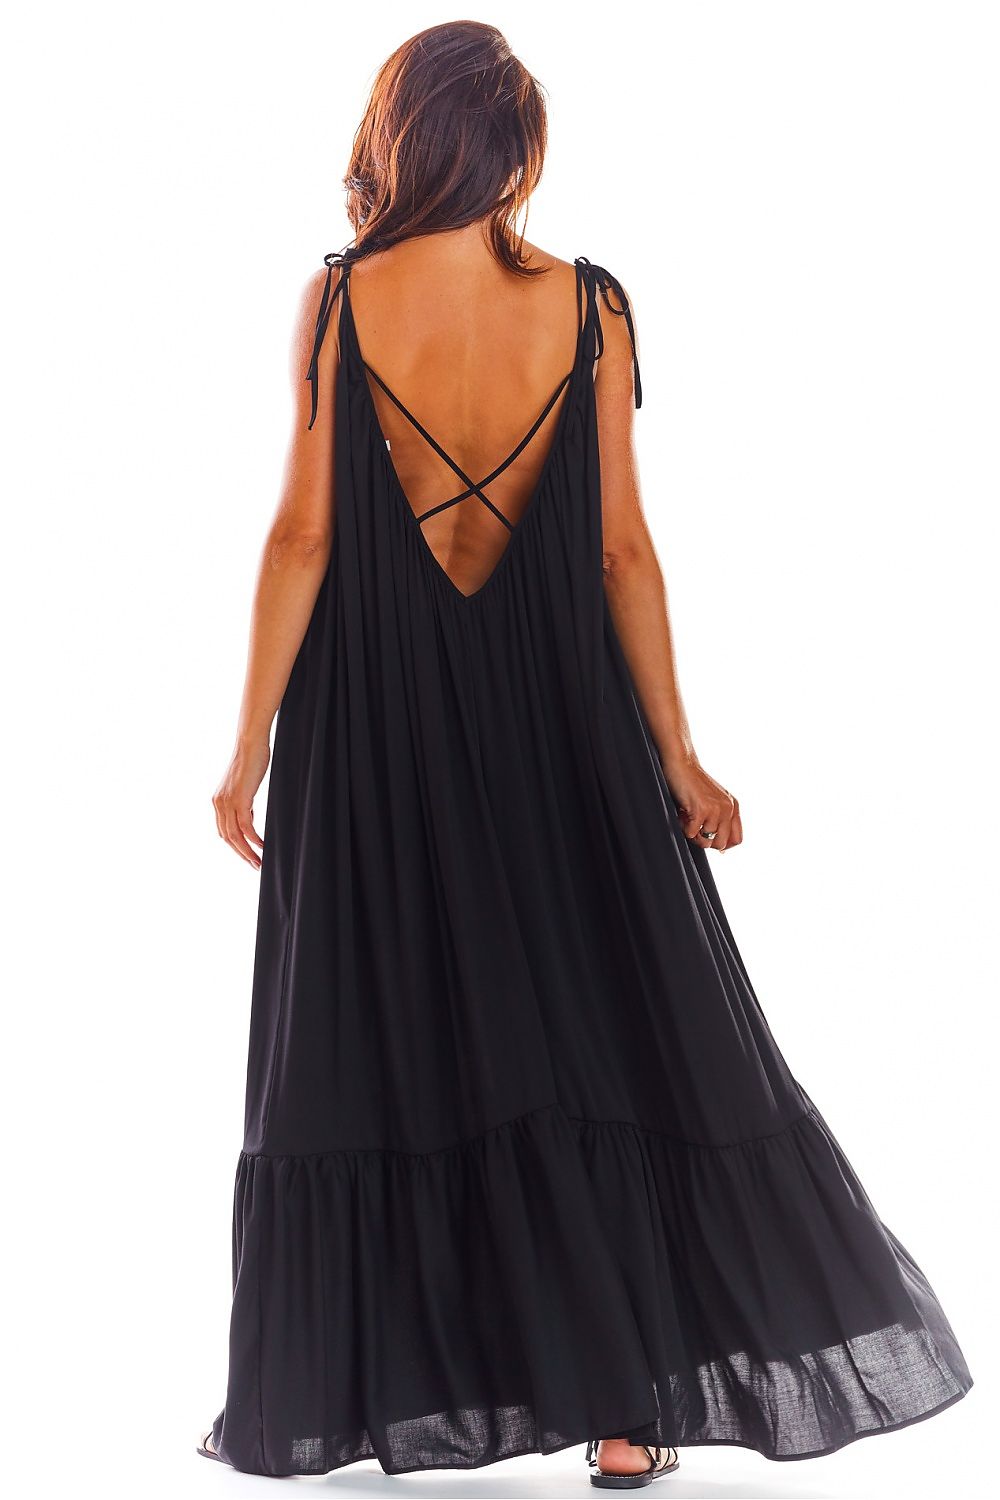 Maxi dress with open back